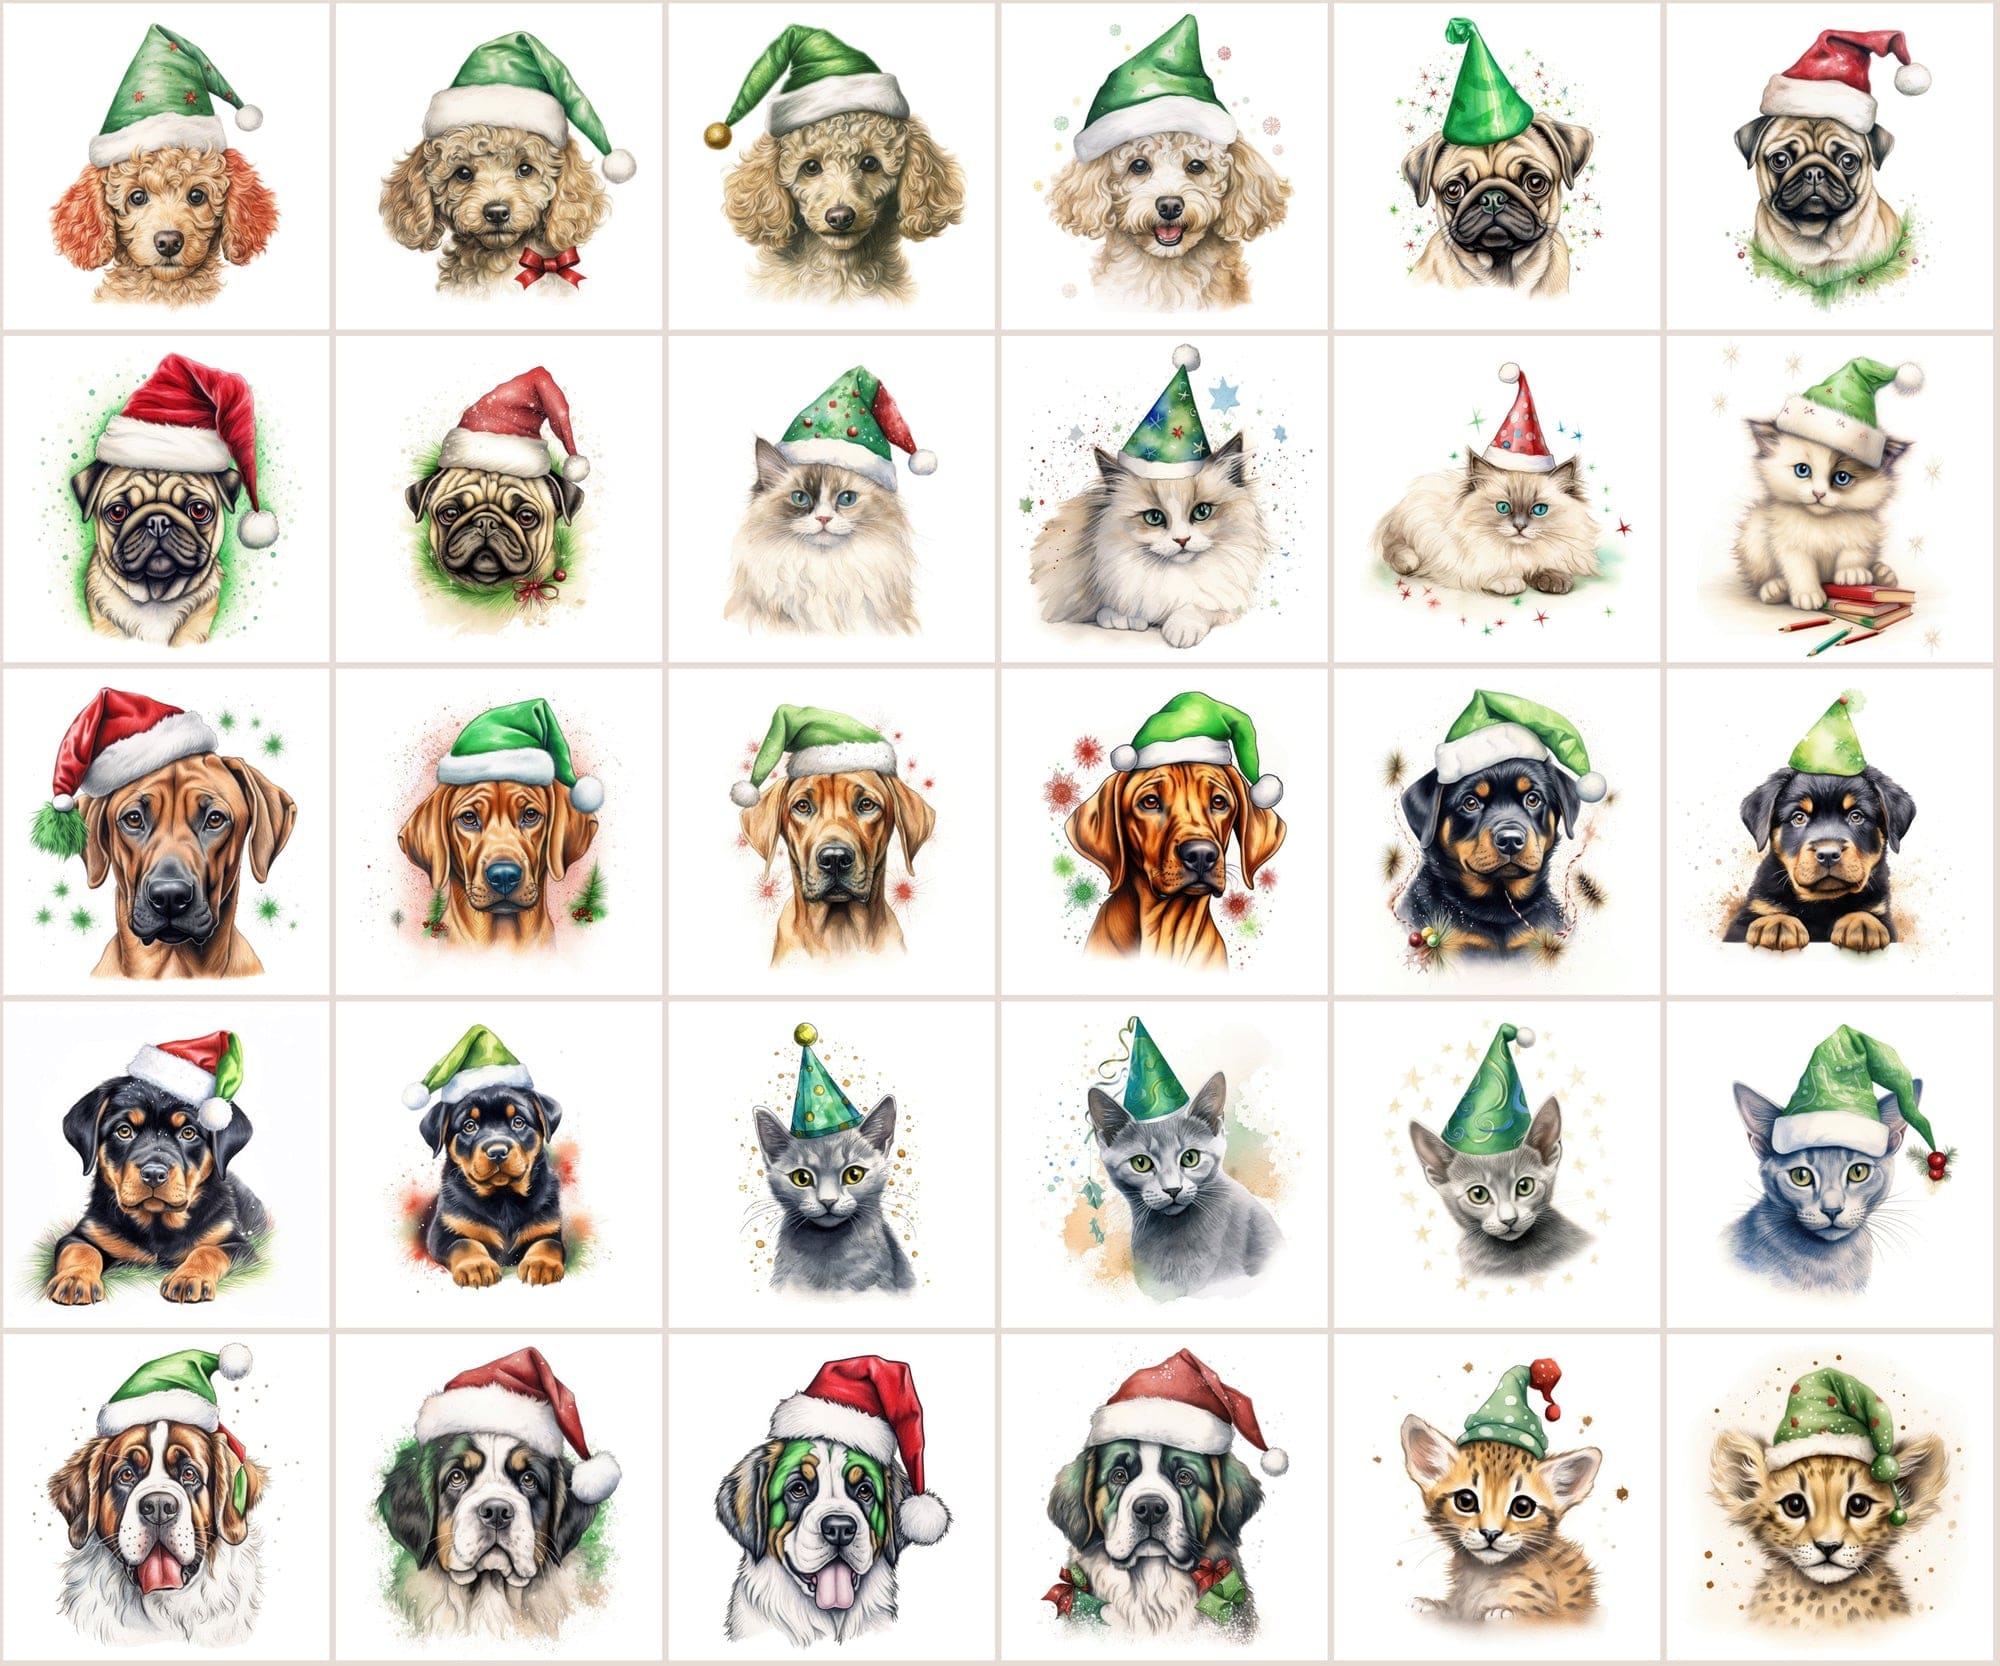 280 Animal Santa Hat PNGs: Dogs, Cats, Christmas Clipart, Commercial License Included Digital Download Sumobundle